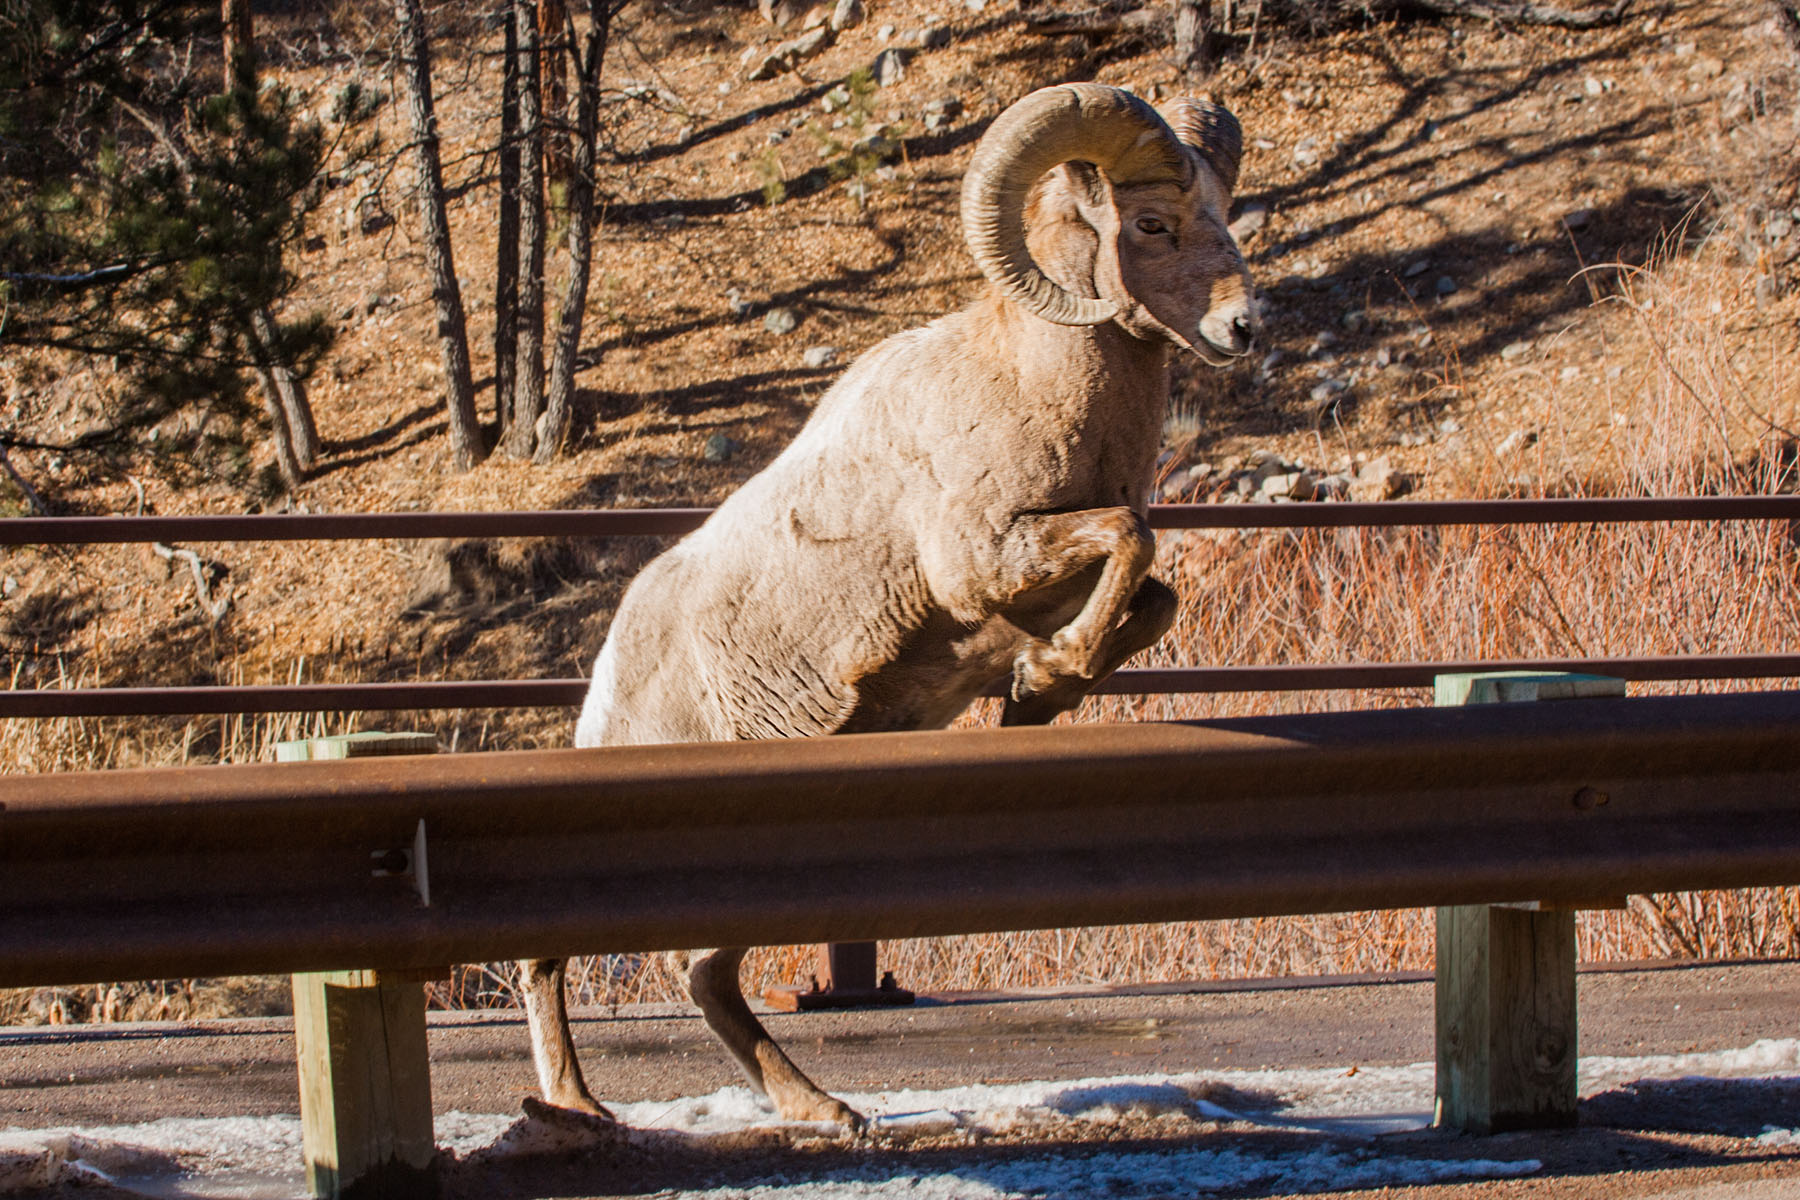 Rocky Mountain Bighorn ram jumping a highway guardrail, Custer State Park.  This was the first time I saw bighorns up close in CSP (or anywhere).  Click for next photo.